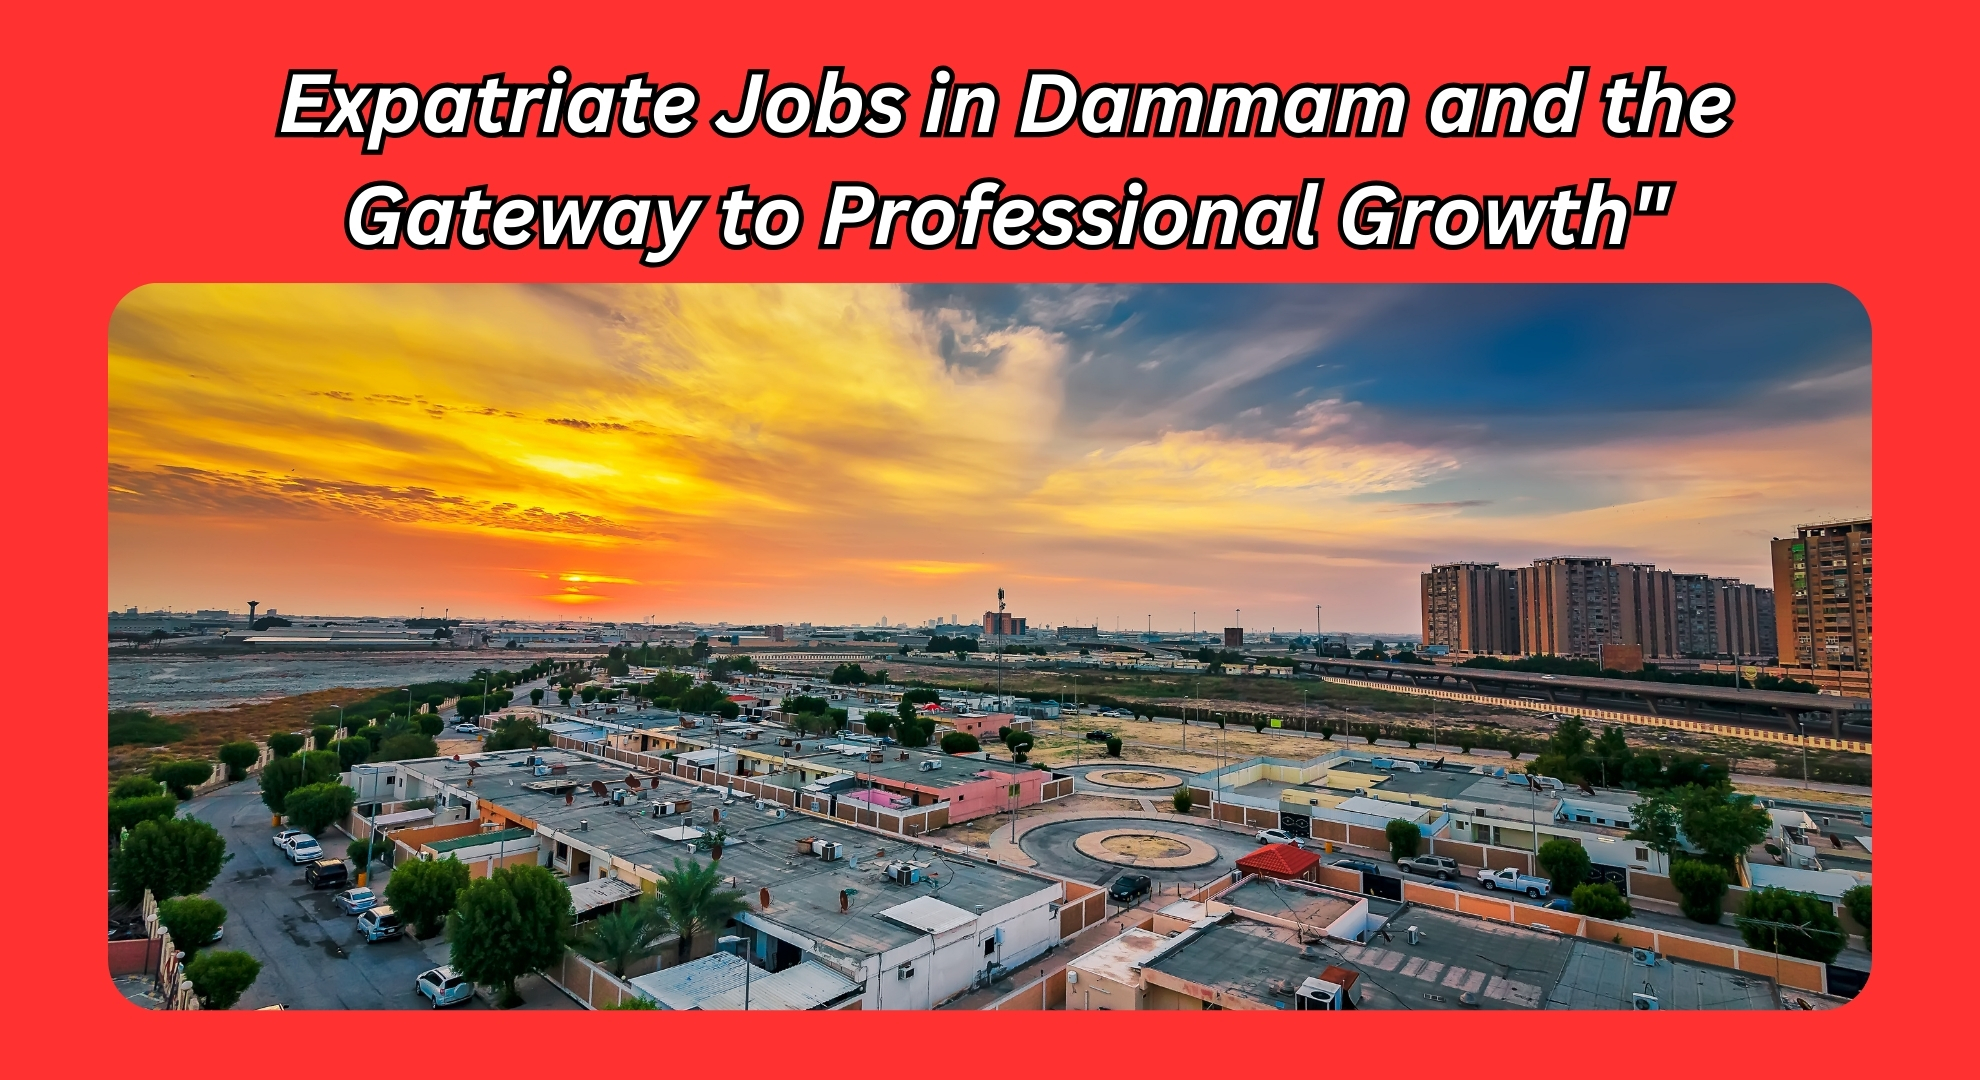 Expatriate Jobs in Dammam and the Gateway to Professional Growth"